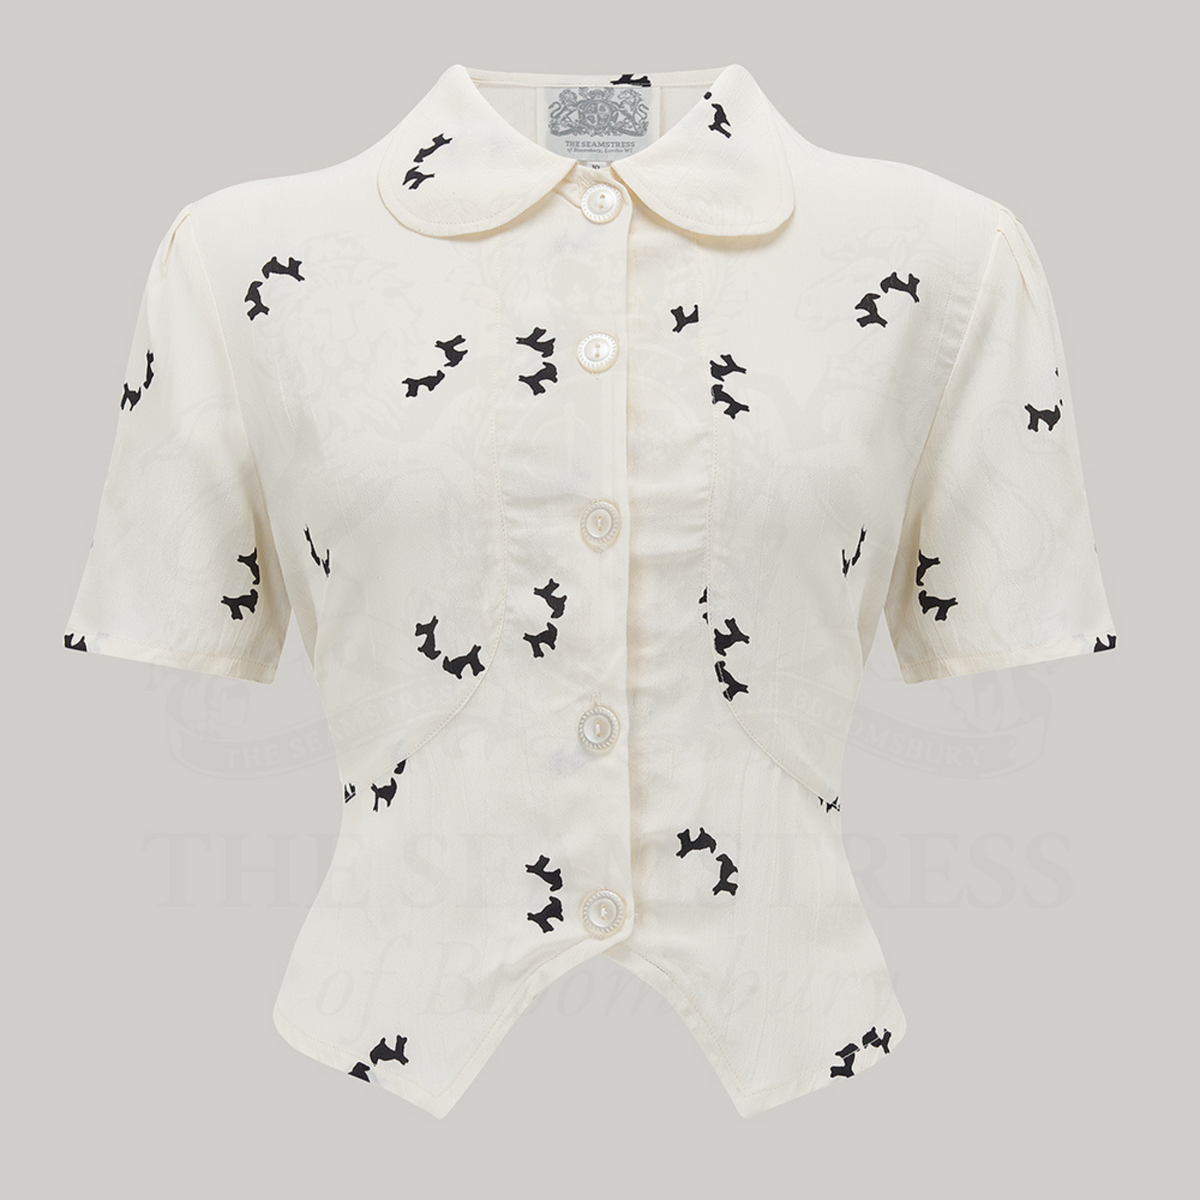 1940s style short sleeve blouse. The blouse is cream coloured with small black dogs dotted around the blouse. Featuring a Peter-Pan front collar, buttons down the front, and a tie-waist belt. 